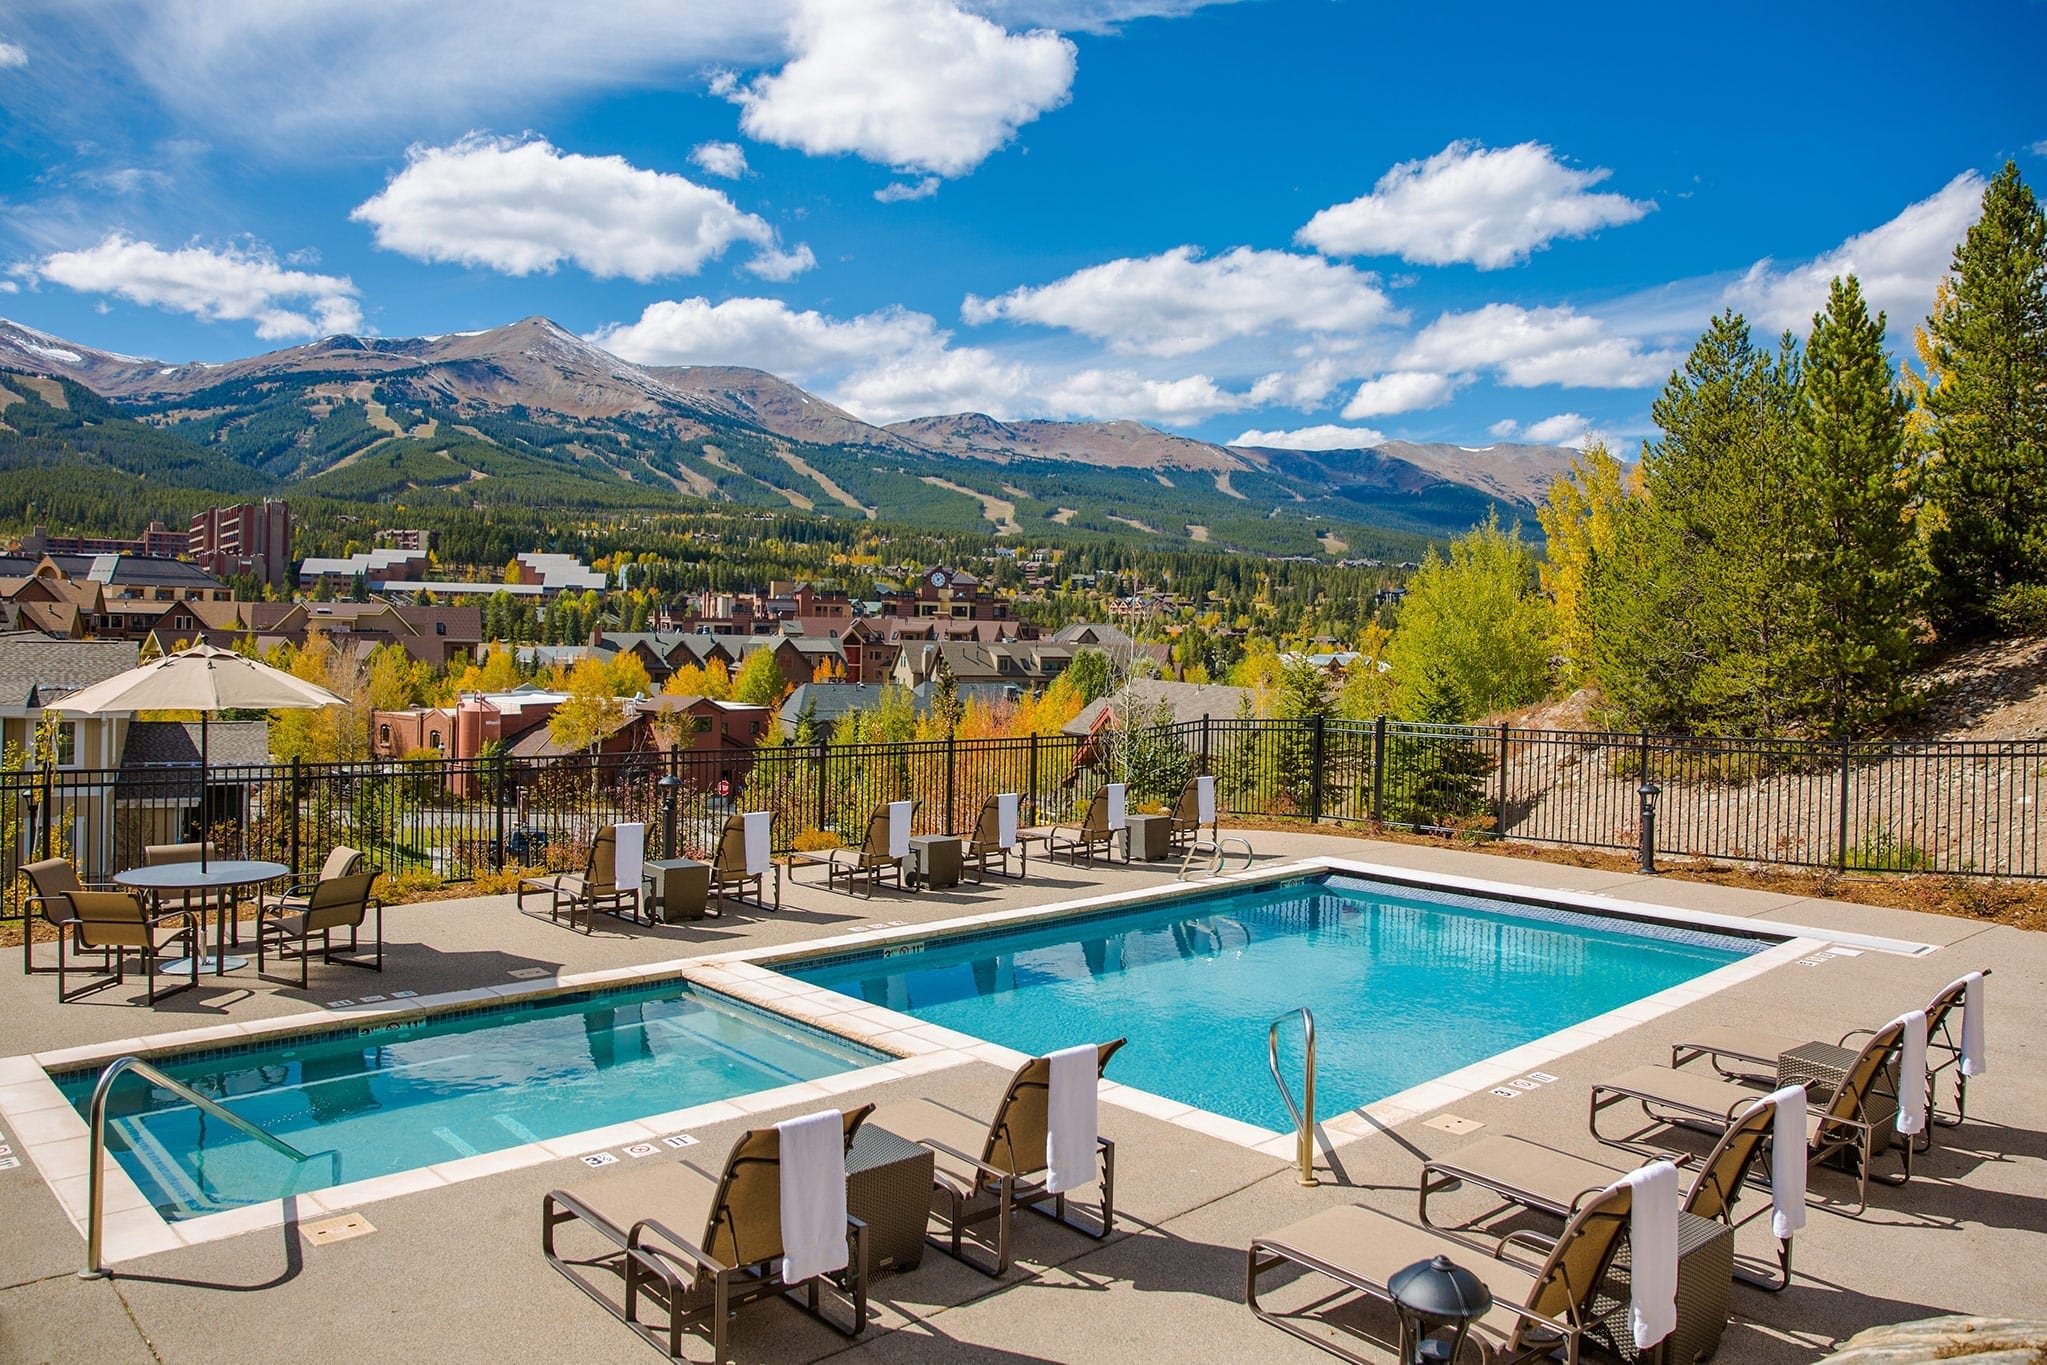 The Residence Inn pool area is considered to have one of the best views of any pool in Breckenridge.